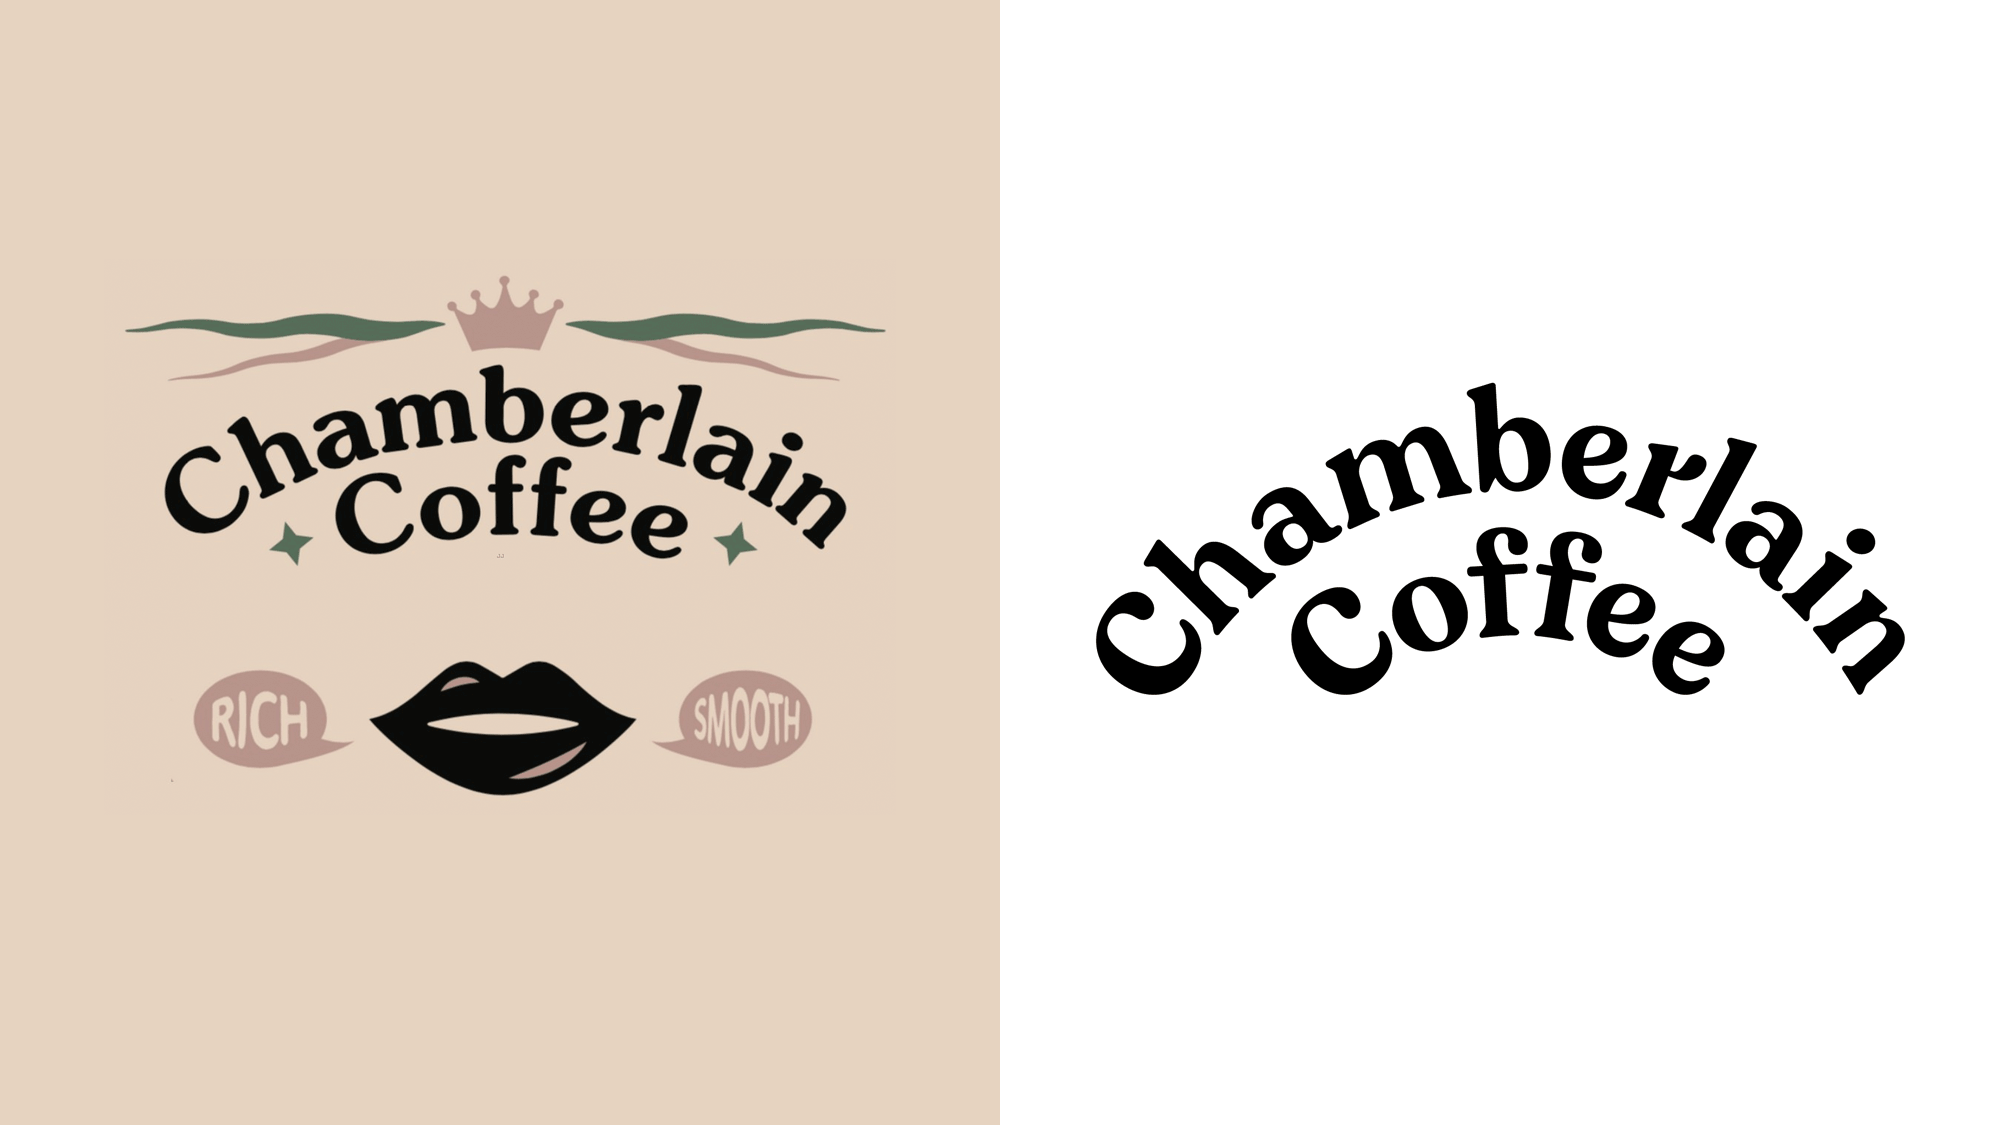 Brand New: New Logo and Packaging for Chamberlain Coffee by Kontrapunkt